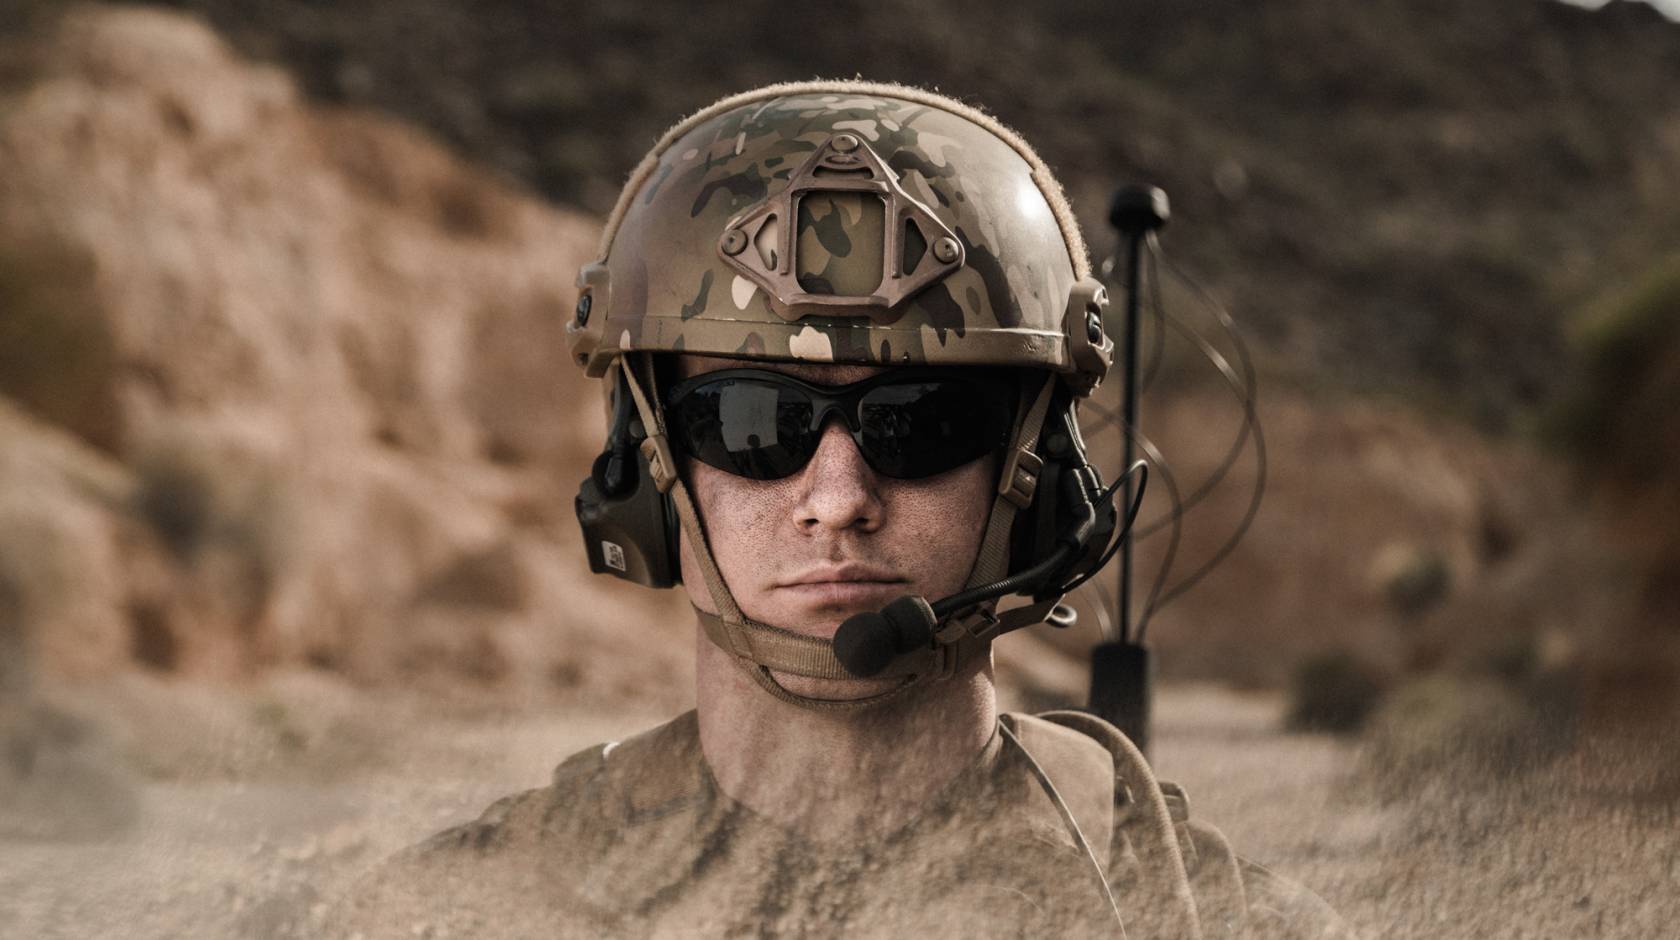 A man with sunglasses in military gear, in a desert